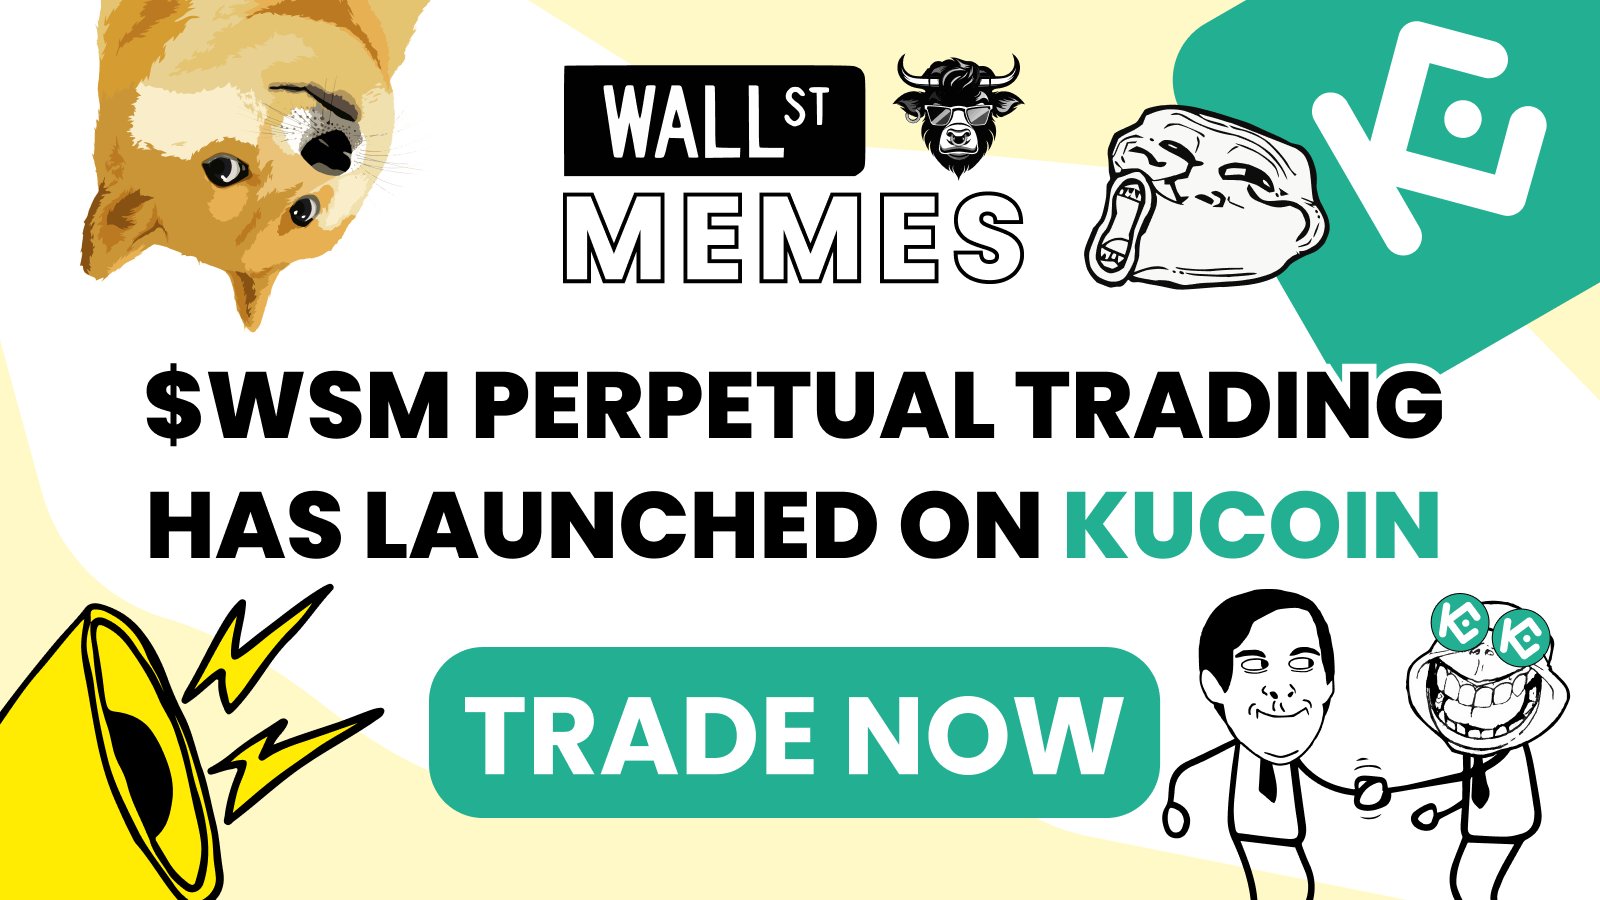 Wall Street Memes News: KuCoin has listed Wall Street Meme’s native token $WSM for perpetual futures trading with up to 20x leverage.